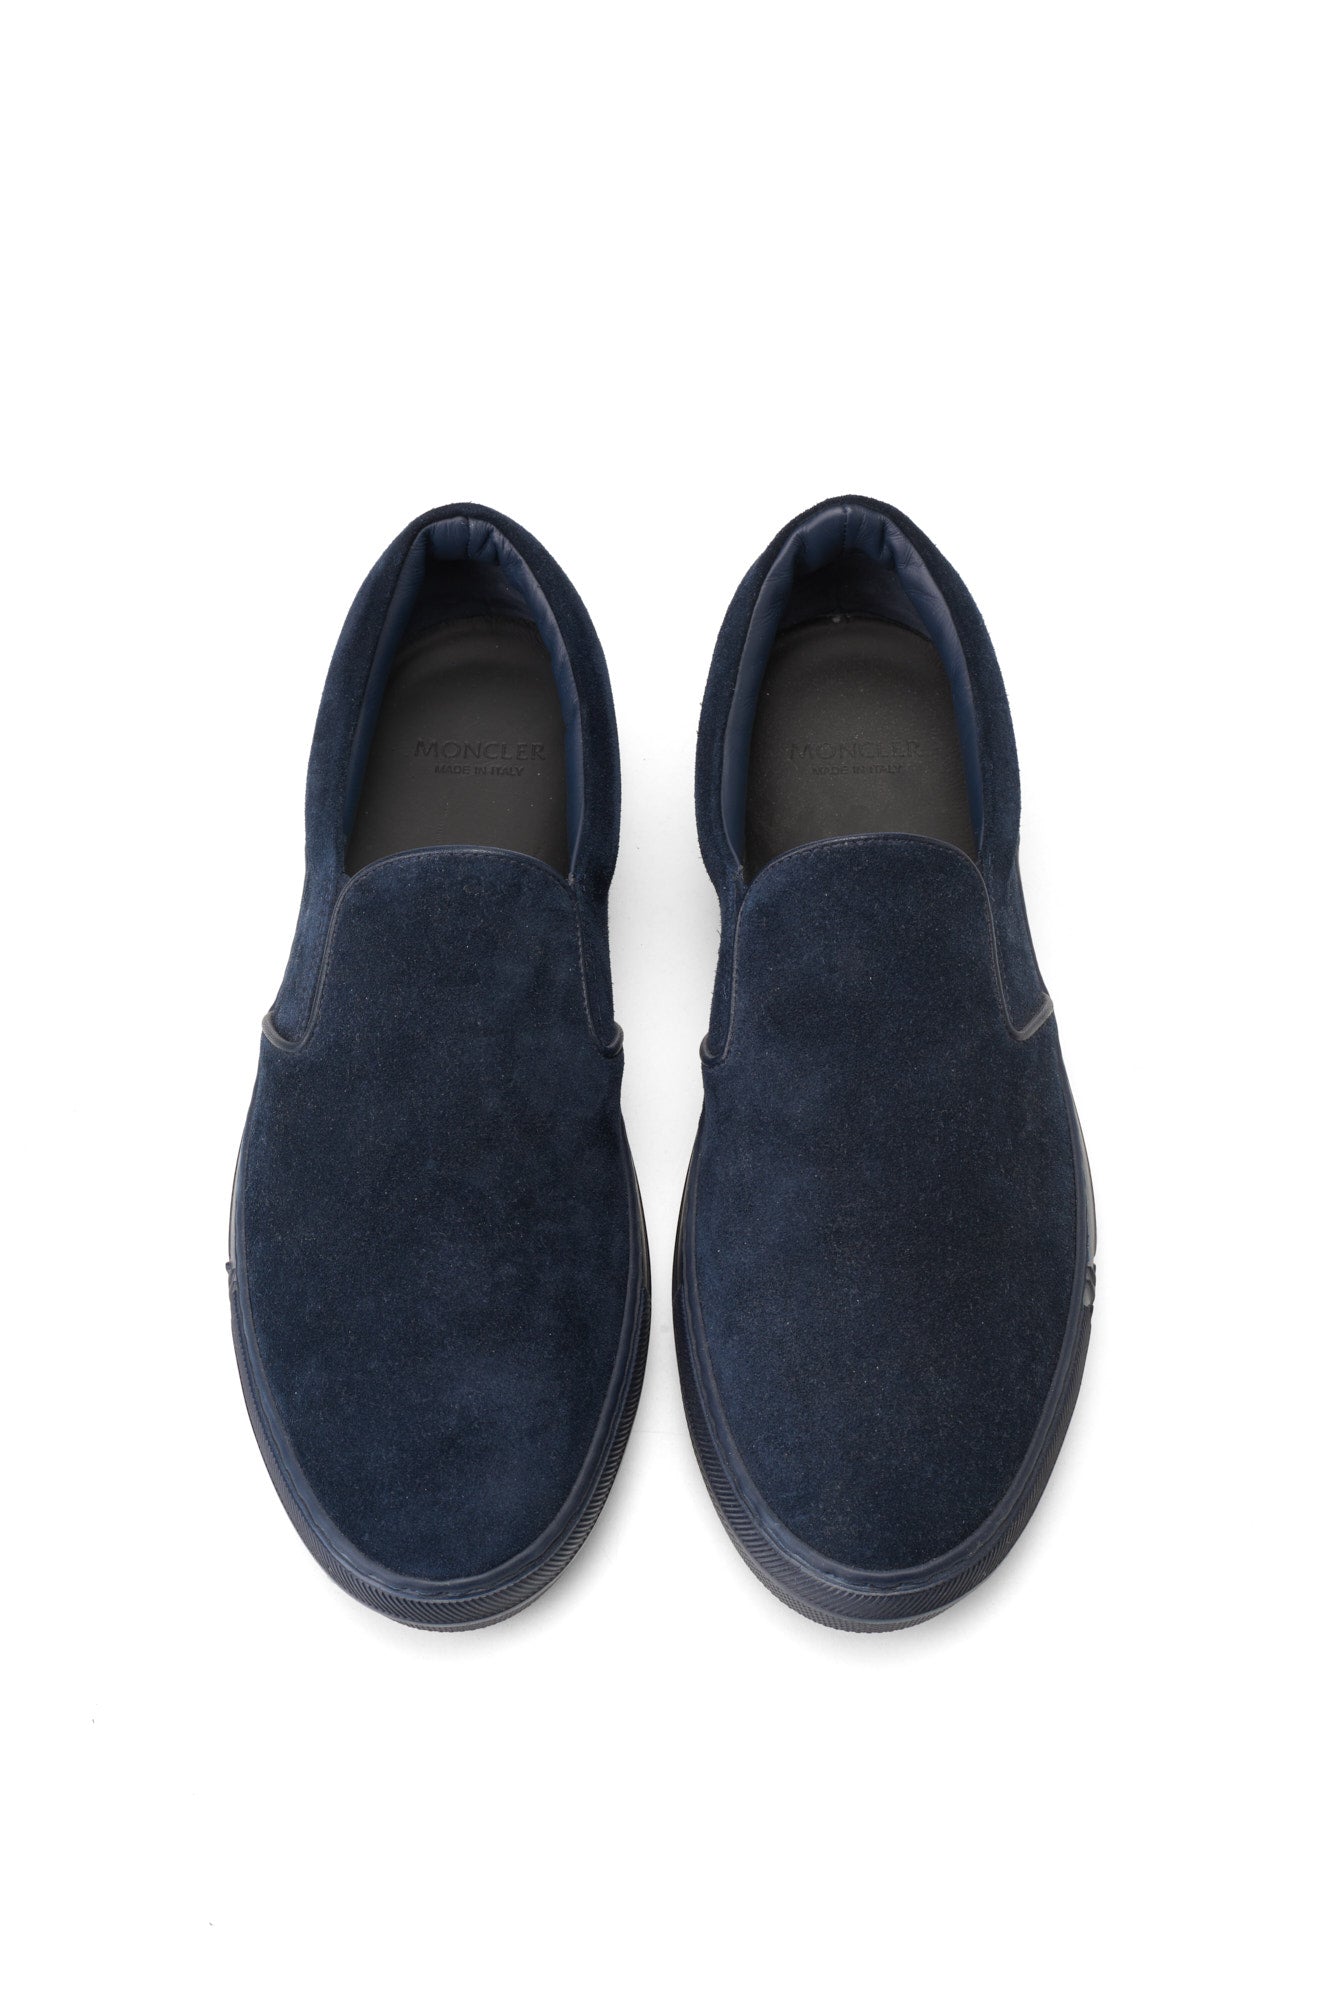 MONCLER Meredith Blue Suede Leather Loafer Slip-on Sneakers EU 40 US 7 NEW